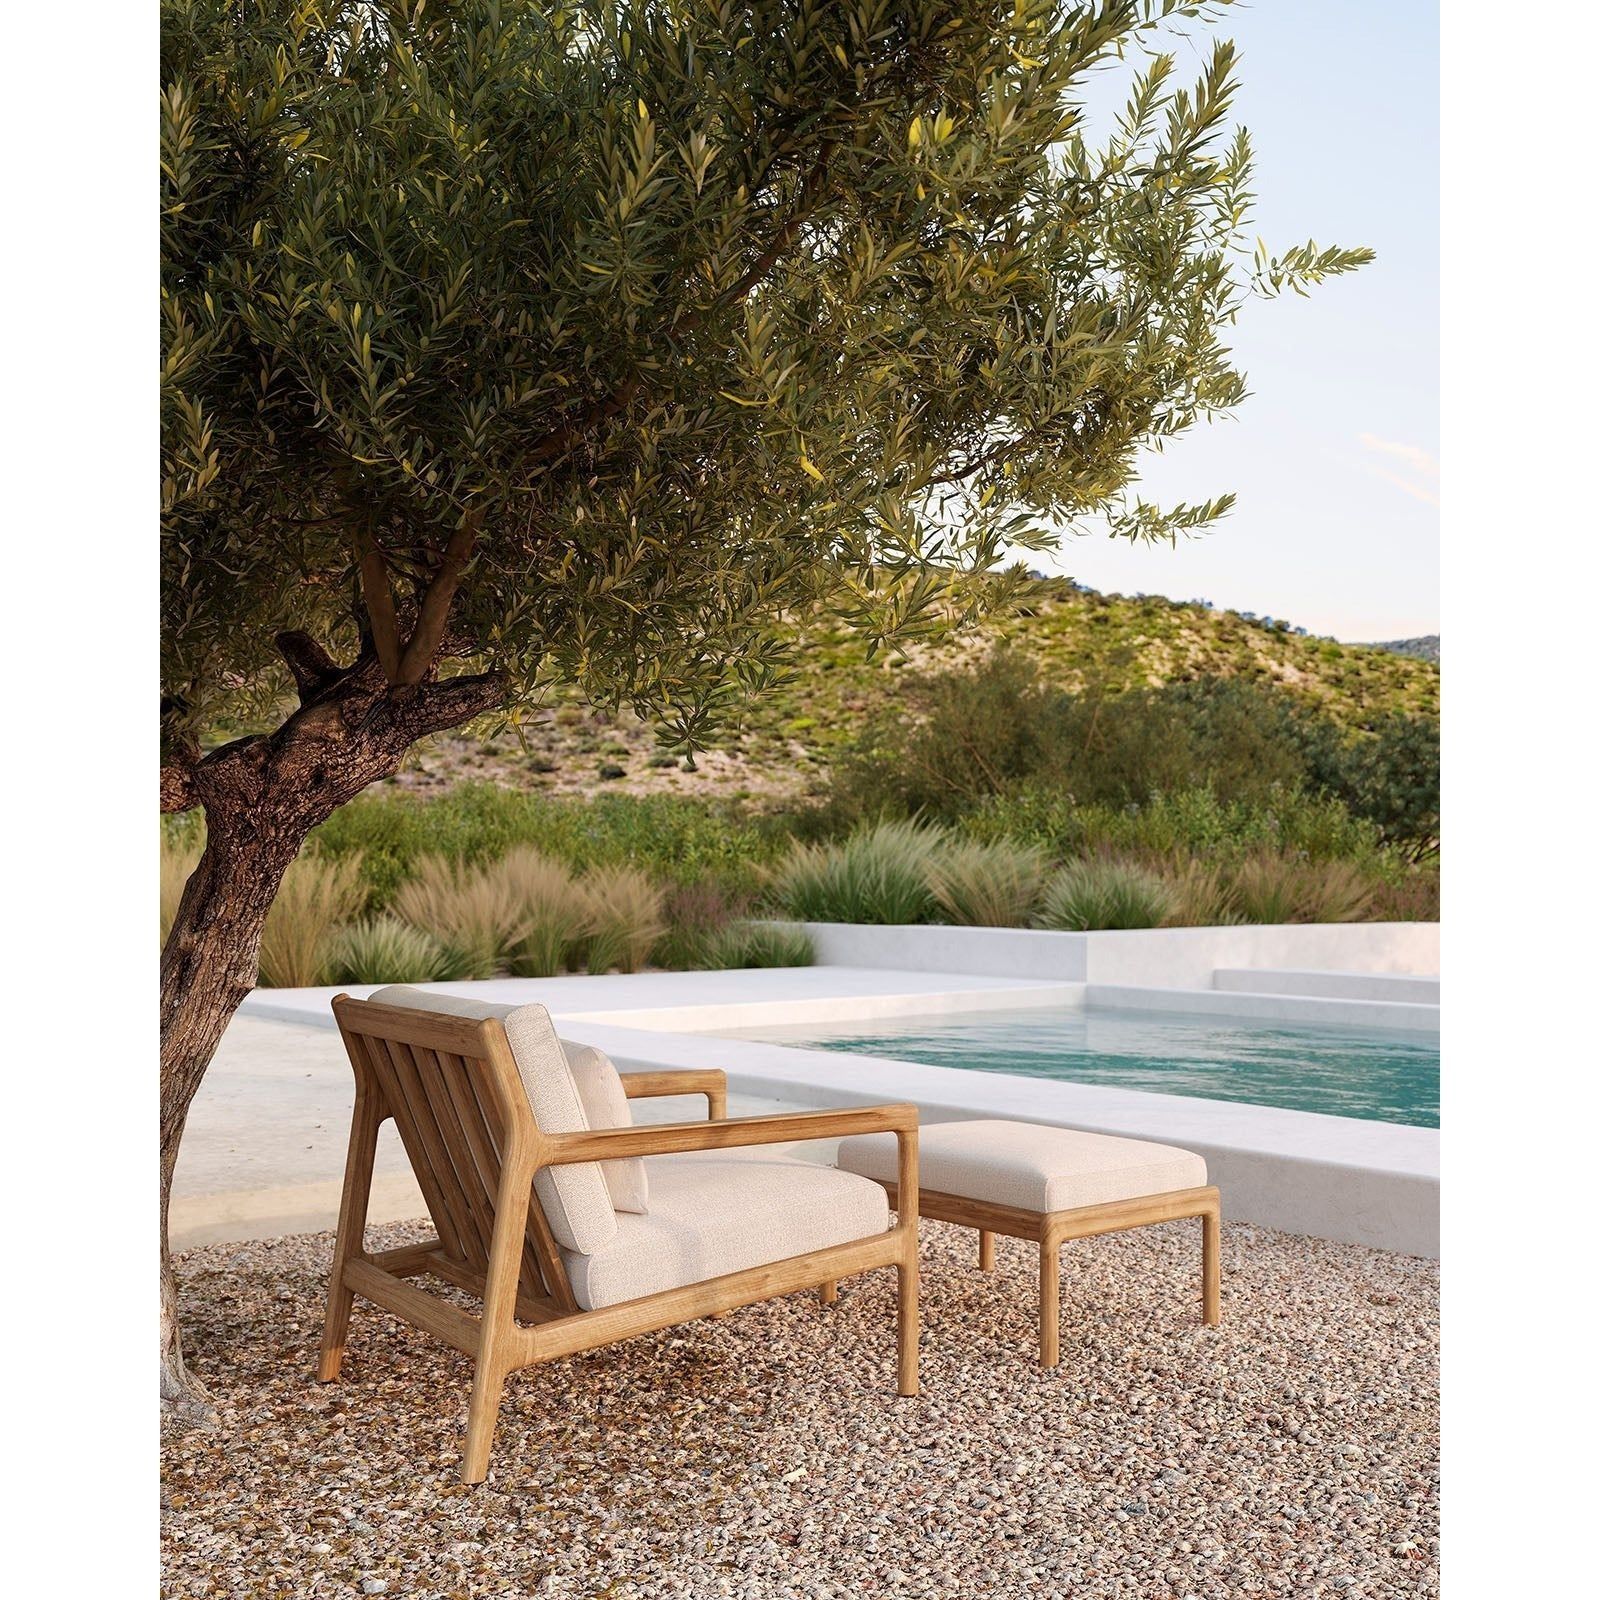 The Timeless Beauty of Outdoor Teak Furniture